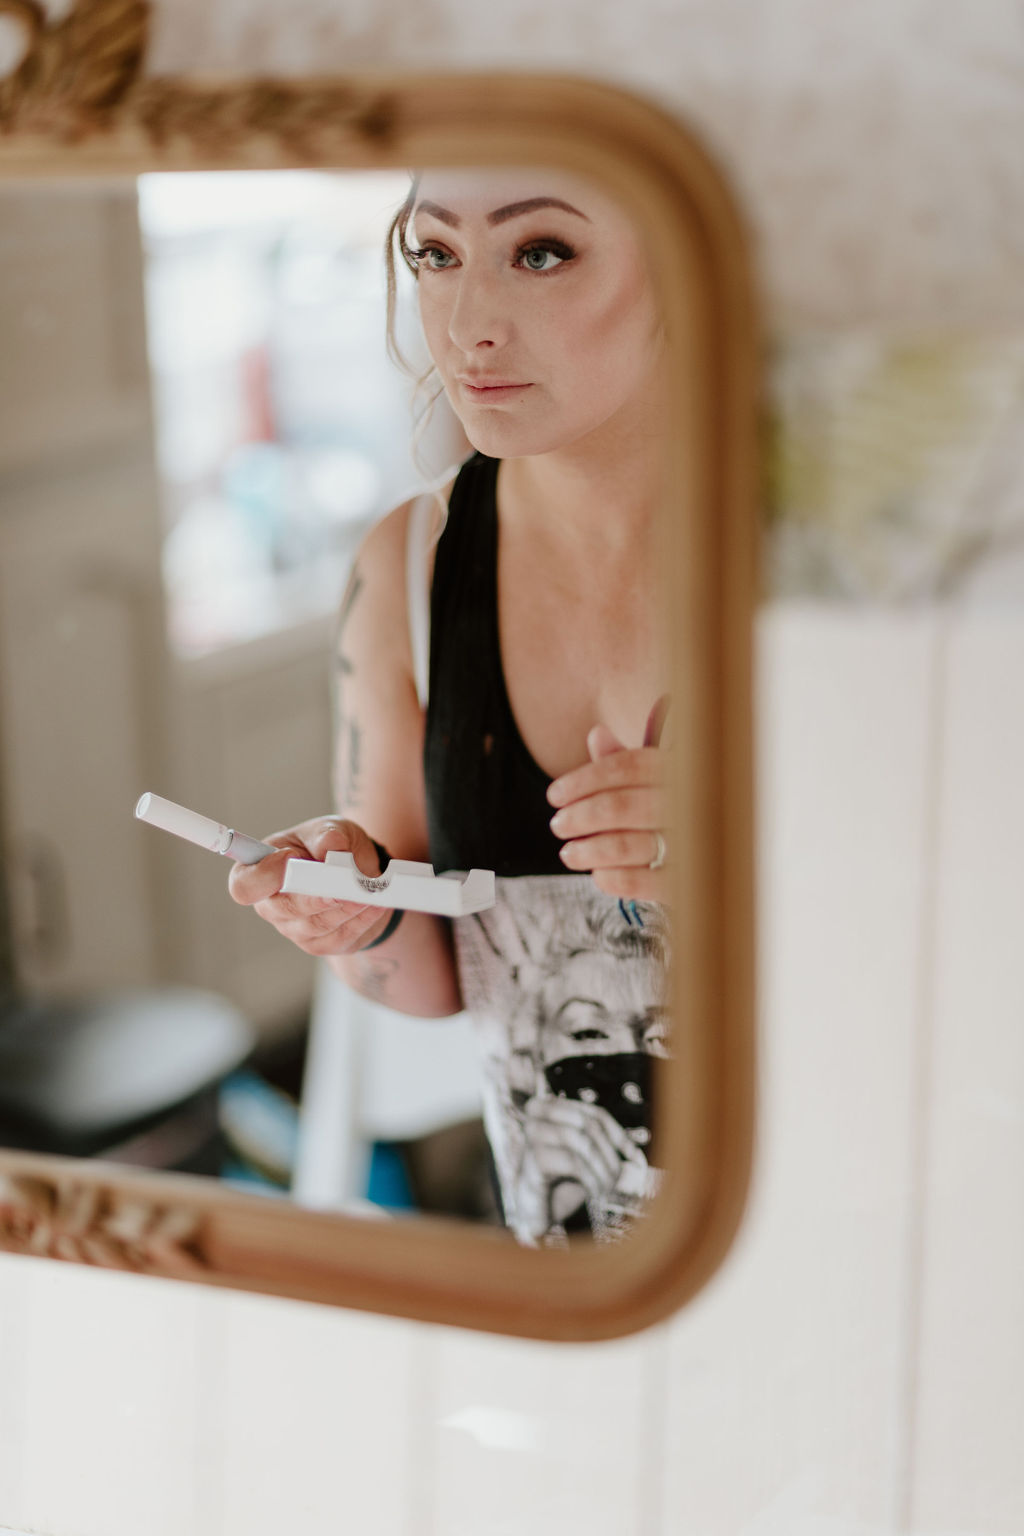 A bride applies makeup, focusing intently while looking into a mirror.